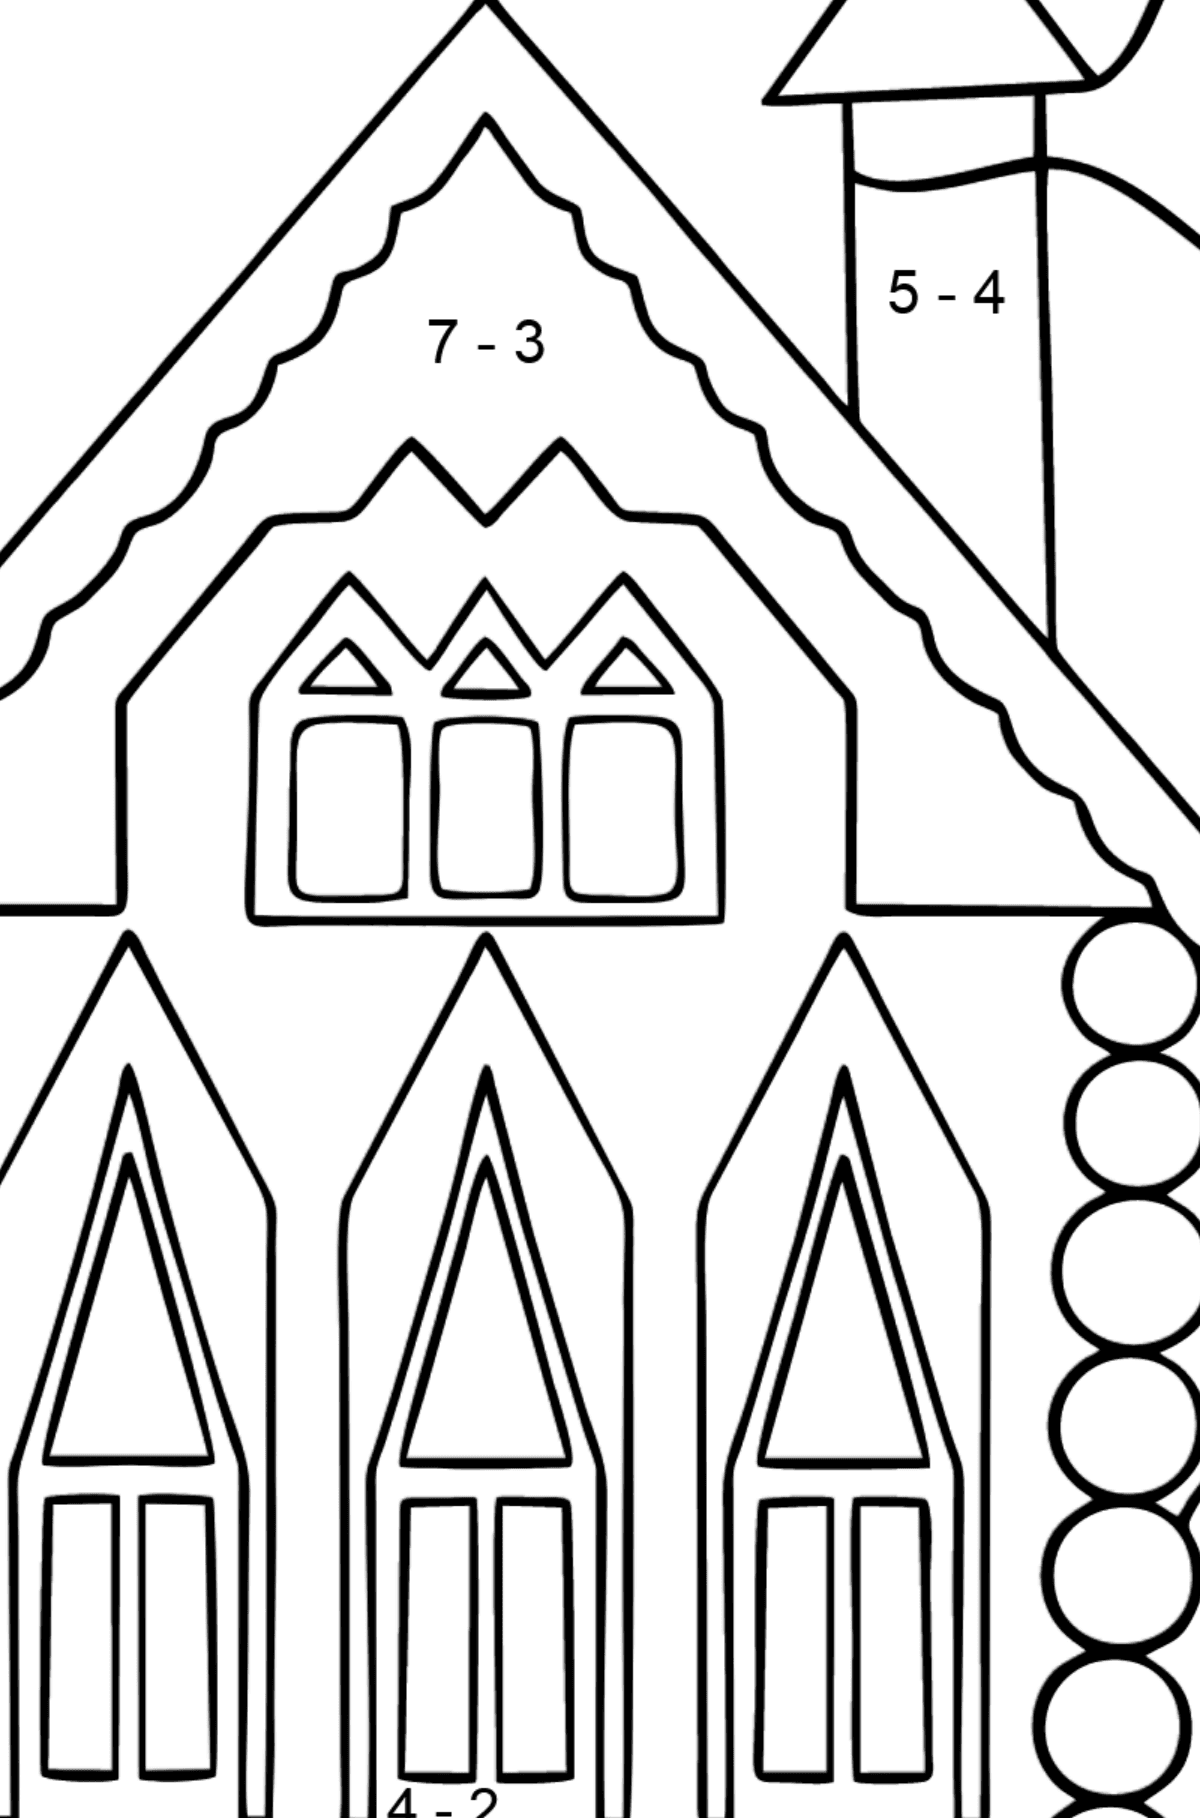 Simple Coloring Page - A Rainbow House - Math Coloring - Subtraction for Kids